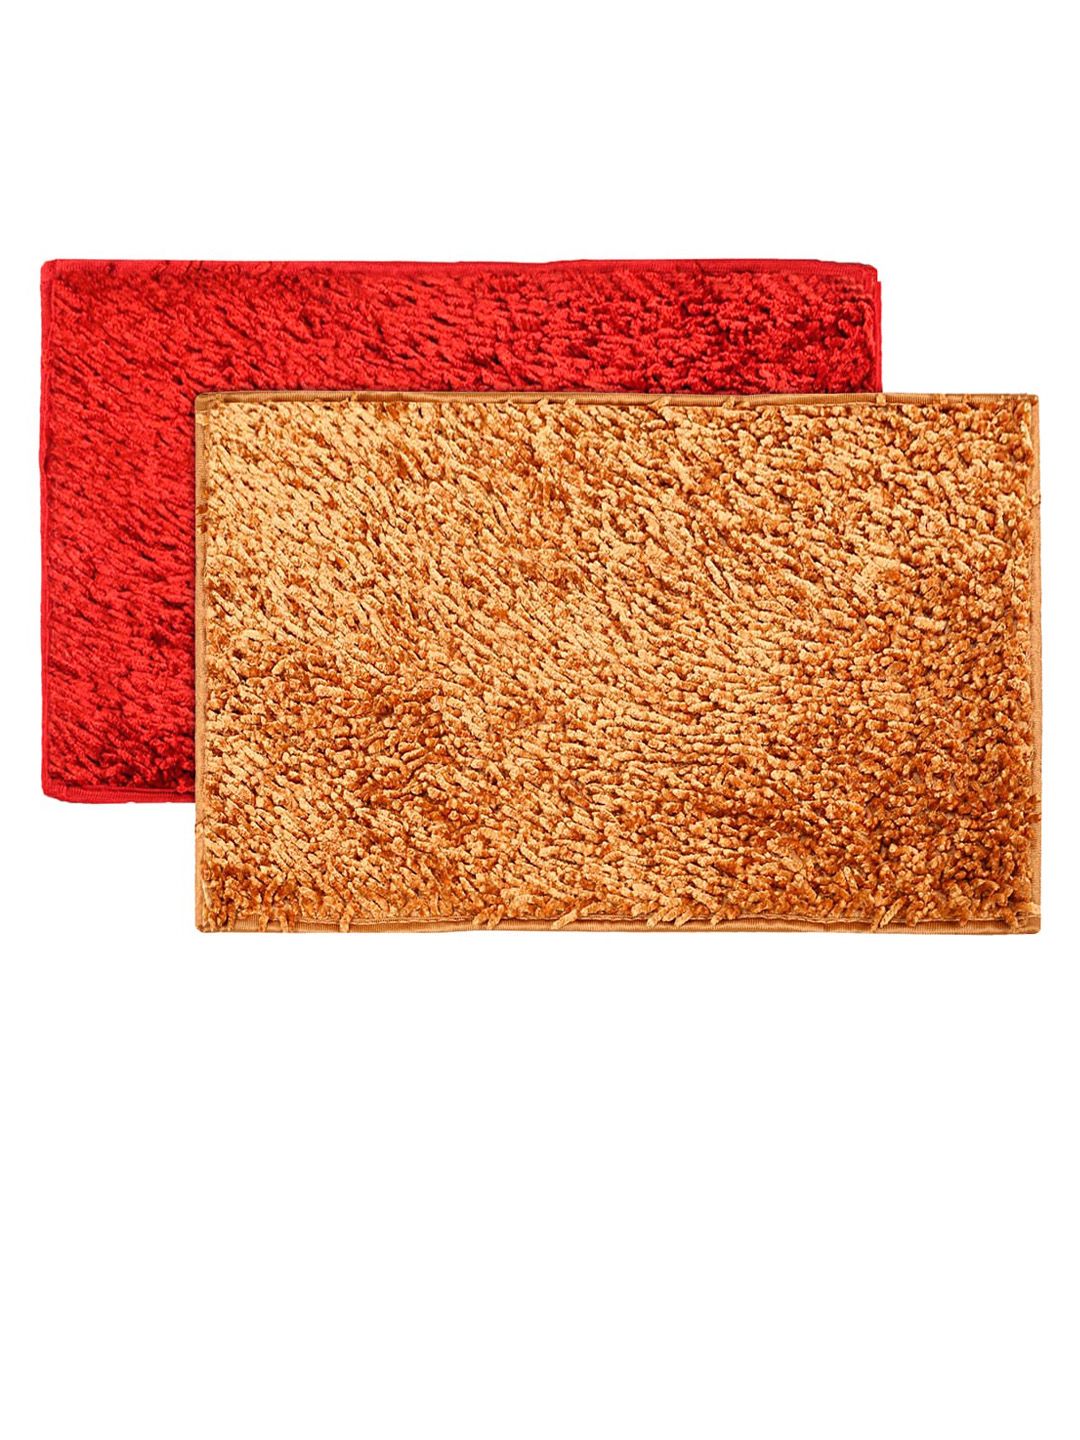 Kuber Industries Set Of 2 Gold-Toned & Red Shaggy Premium Anti-Skid Doormats Price in India